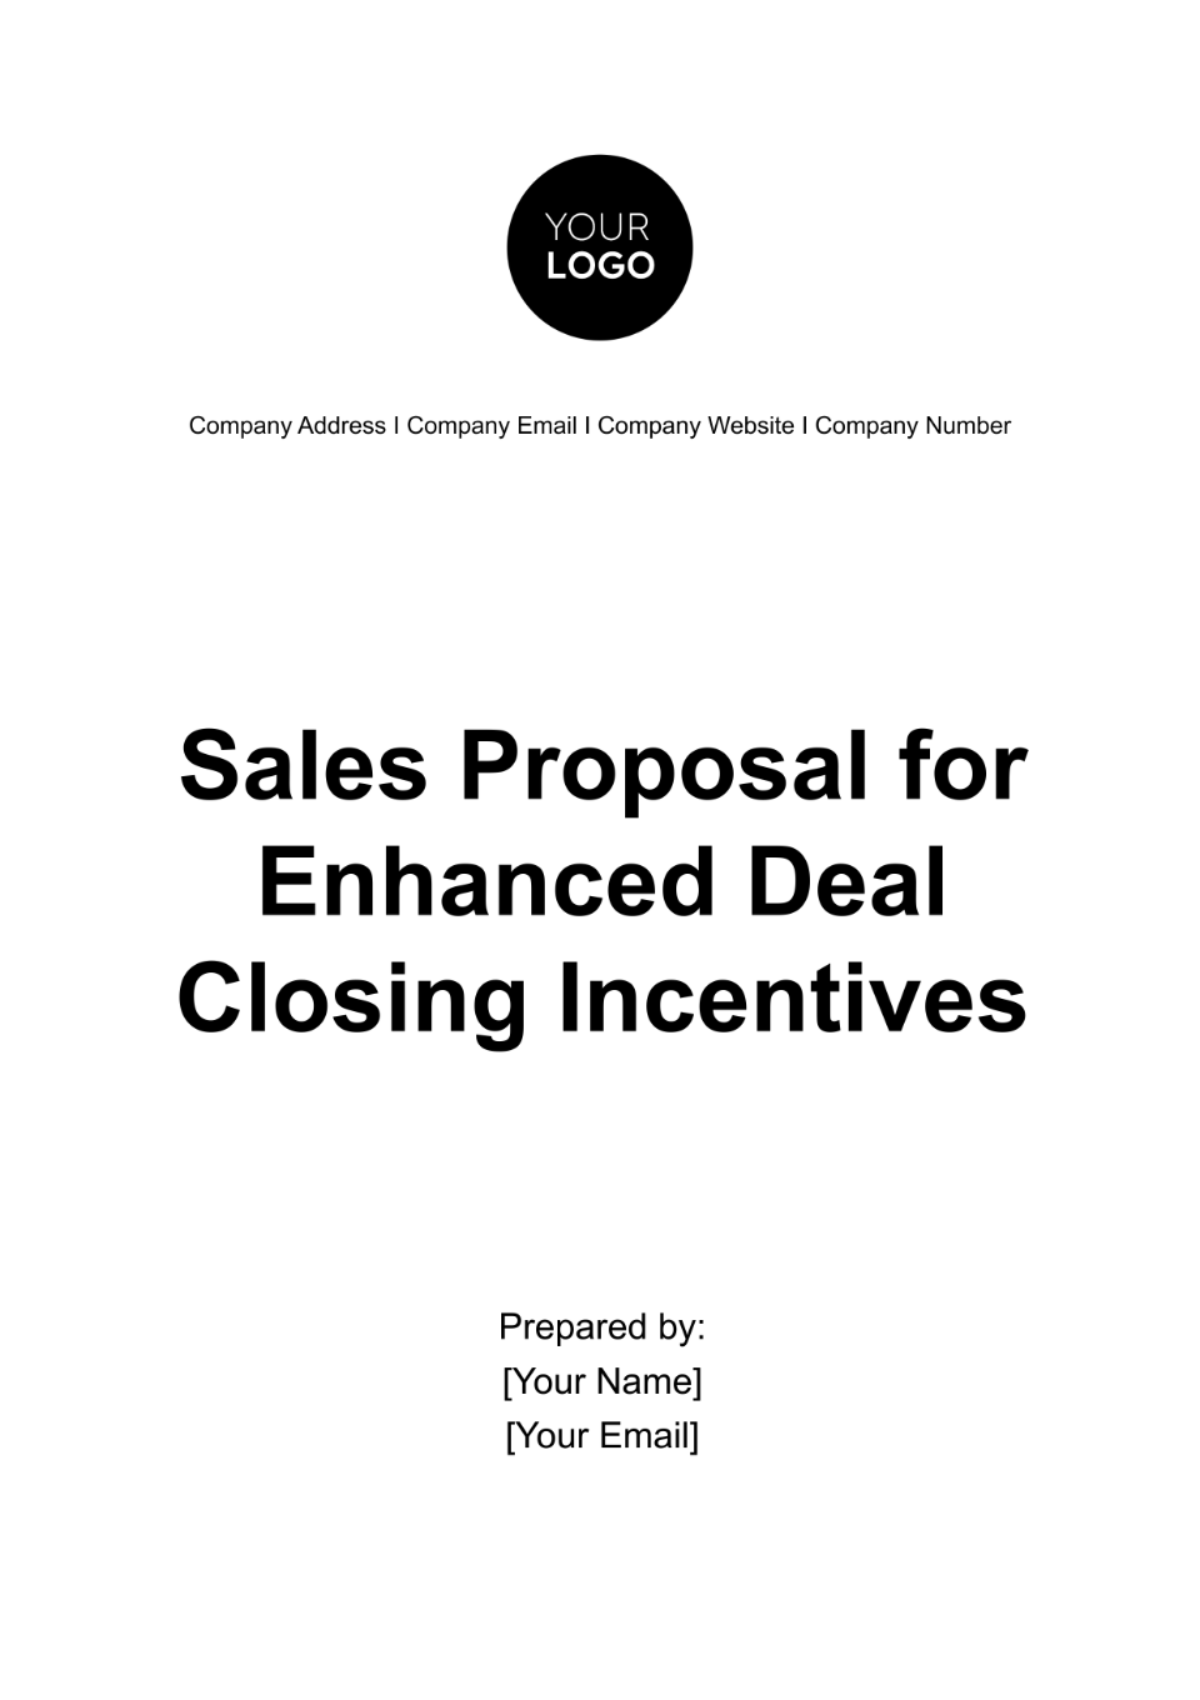 Sales Proposal for Enhanced Deal Closing Incentives Template